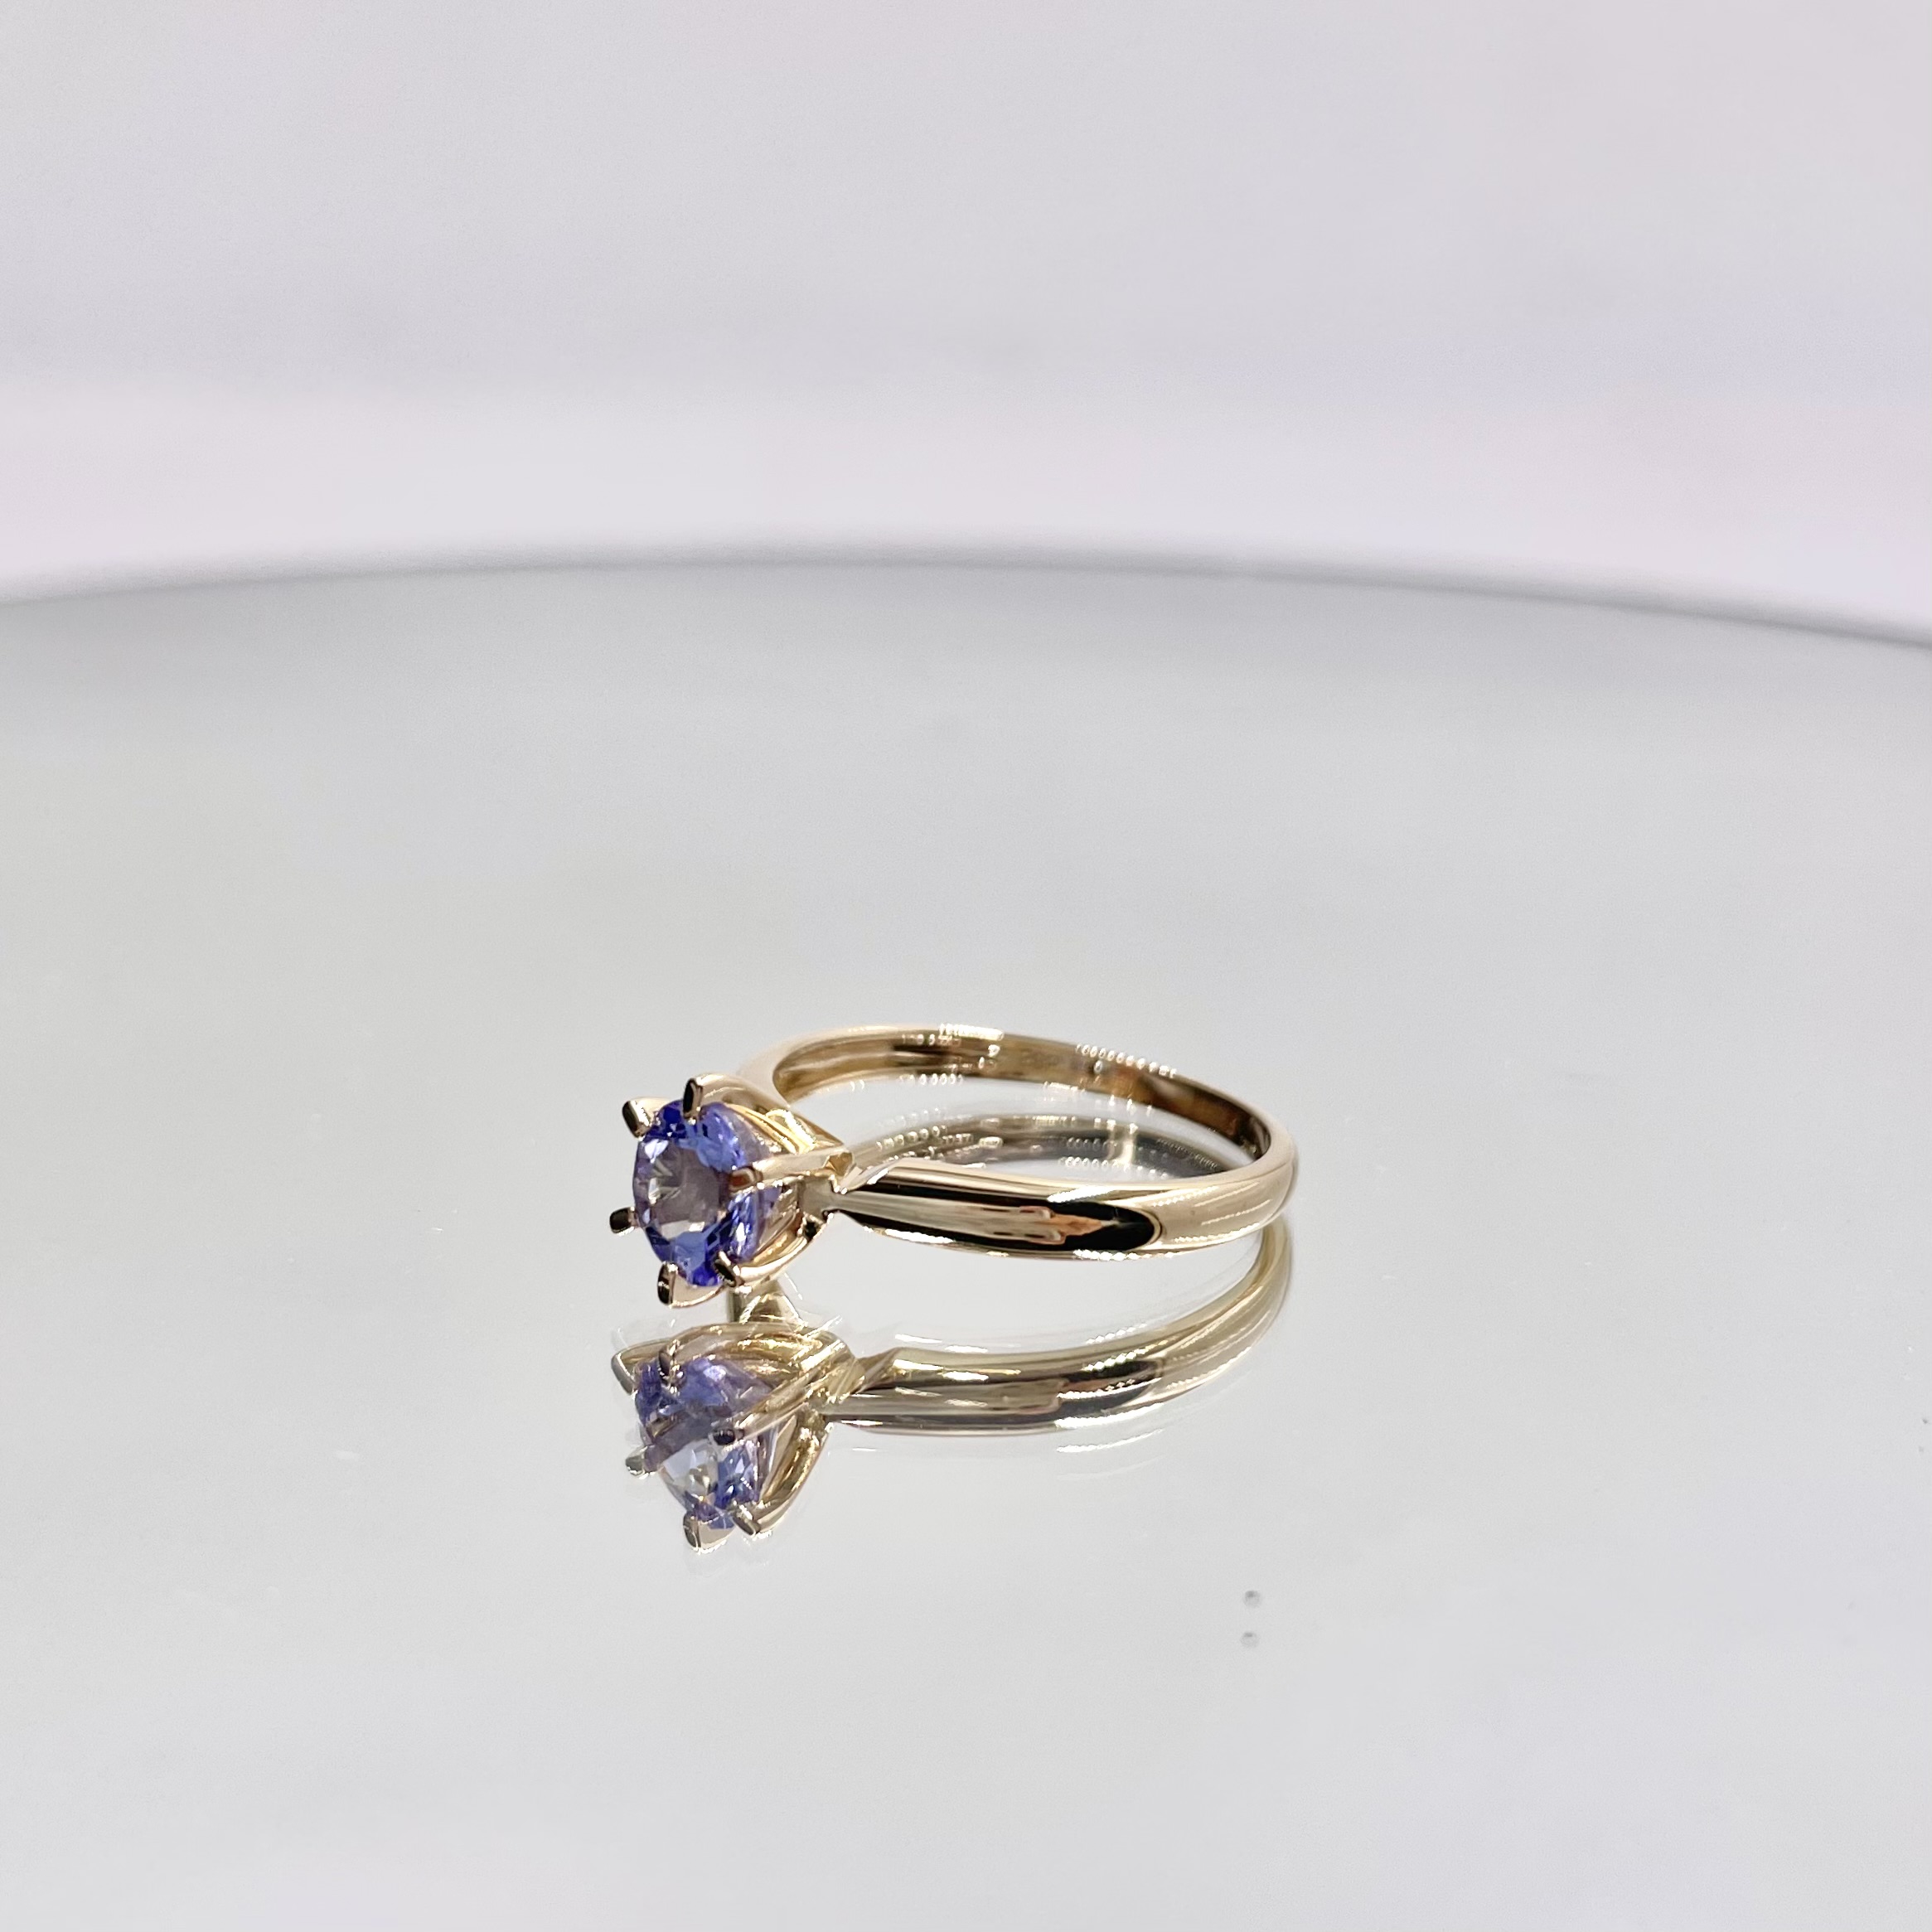 0.8ct 6.0mm Round Cut Natural Tanzanite Six Claw Wedding Ring in 14k Solid Yellow Gold with Gemstone-2